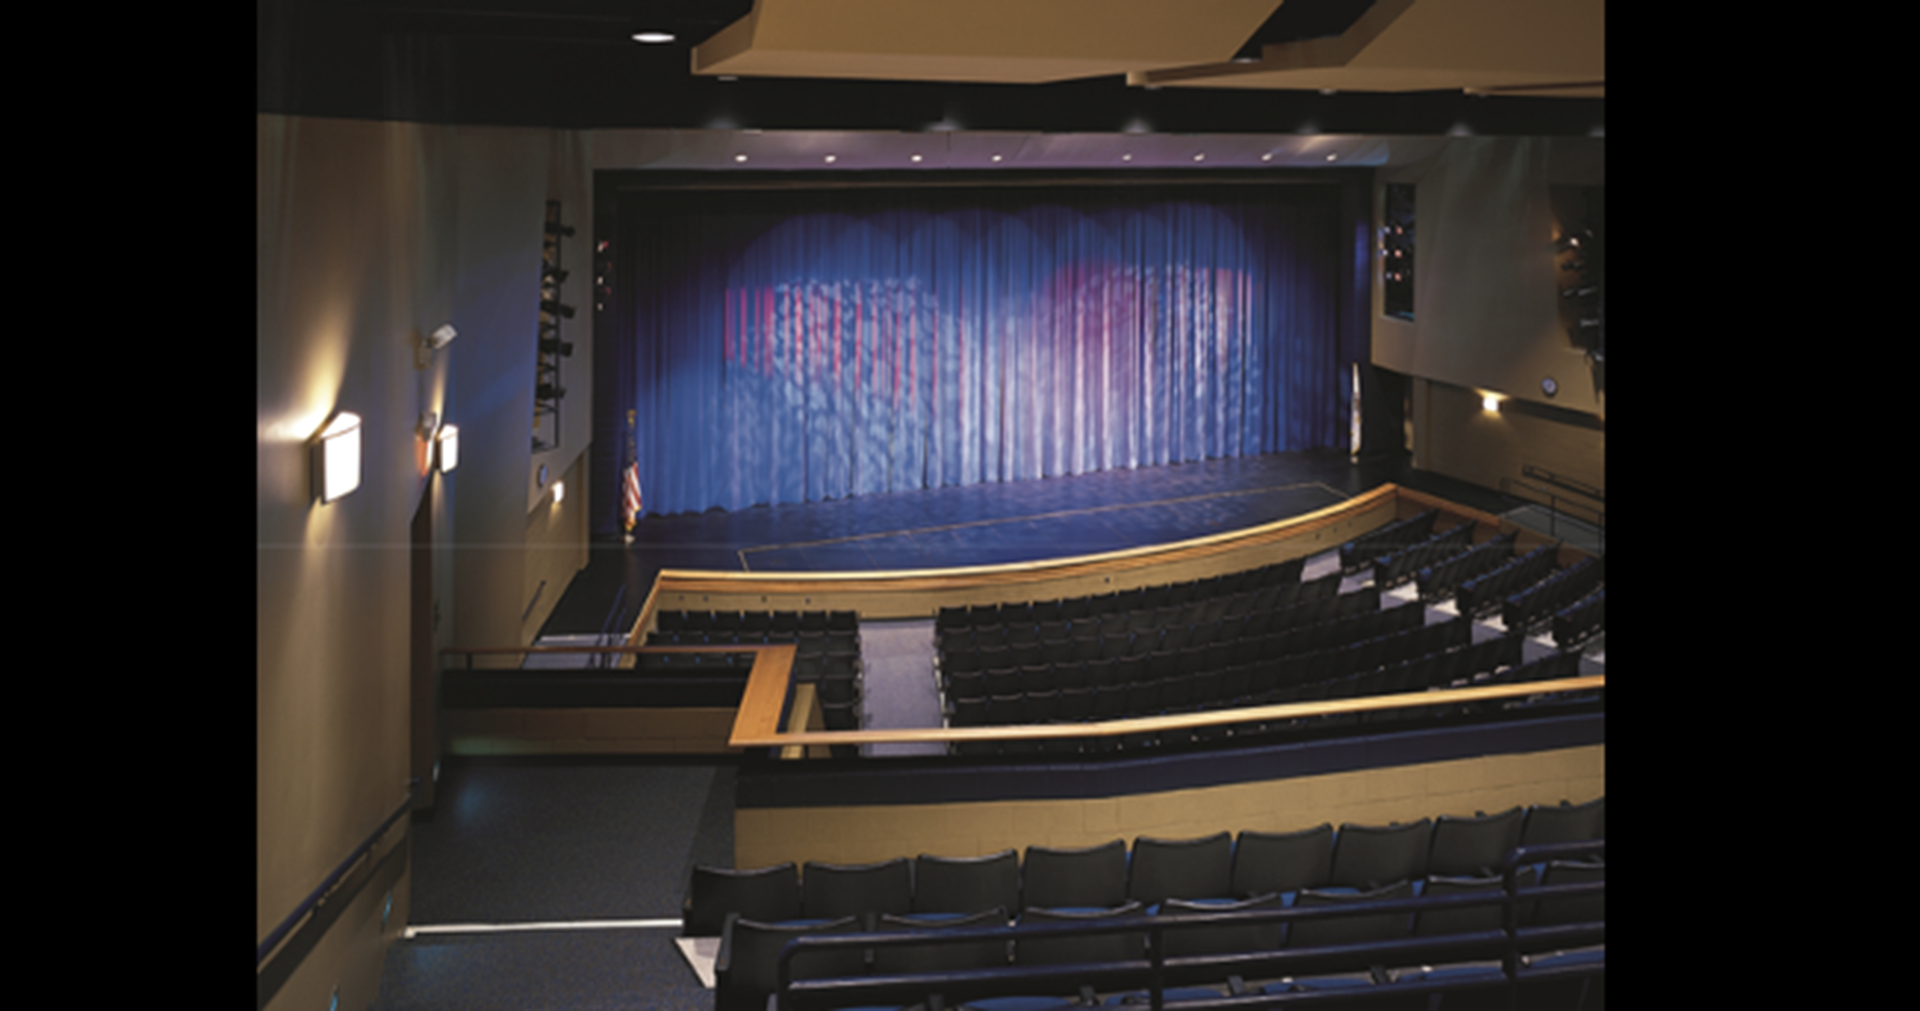 An image of an auditorium in a Chicago suburban high school